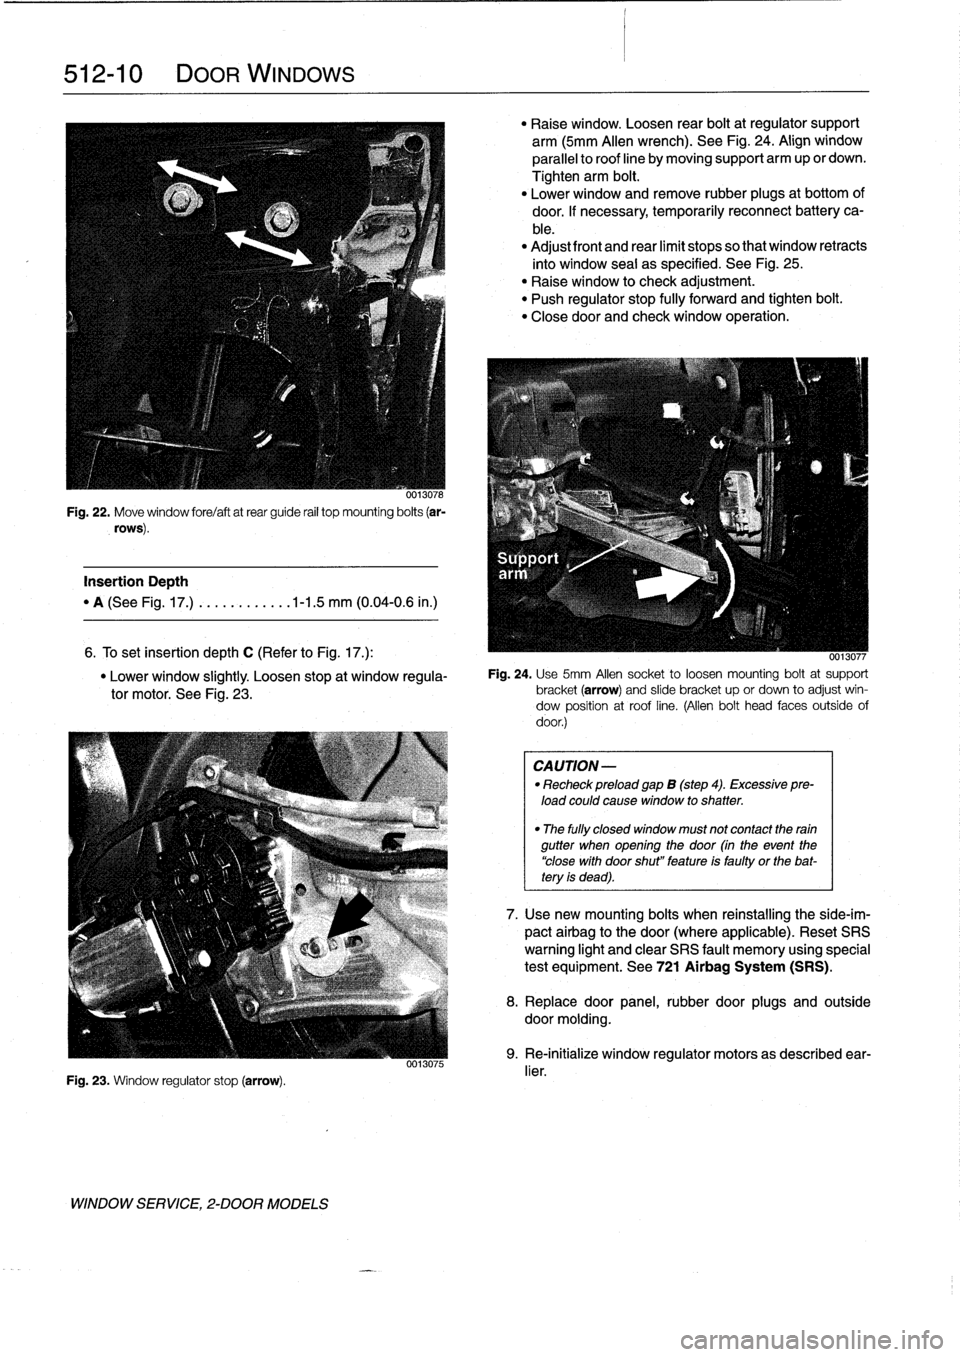 BMW 323i 1995 E36 Workshop Manual 
512-
1
0

	

DOOR
WINDOWS

0013078

Fig
.
22
.
Move
window
fore/aftatrear
guide
rail
top
mounting
bolts
(ar-

rows)
.

Insertion
Depth

"
A
(See
Fig
.
17
.)
.
..........
.1-1
.5
mm
(0
.04-0
.6
in
.)
